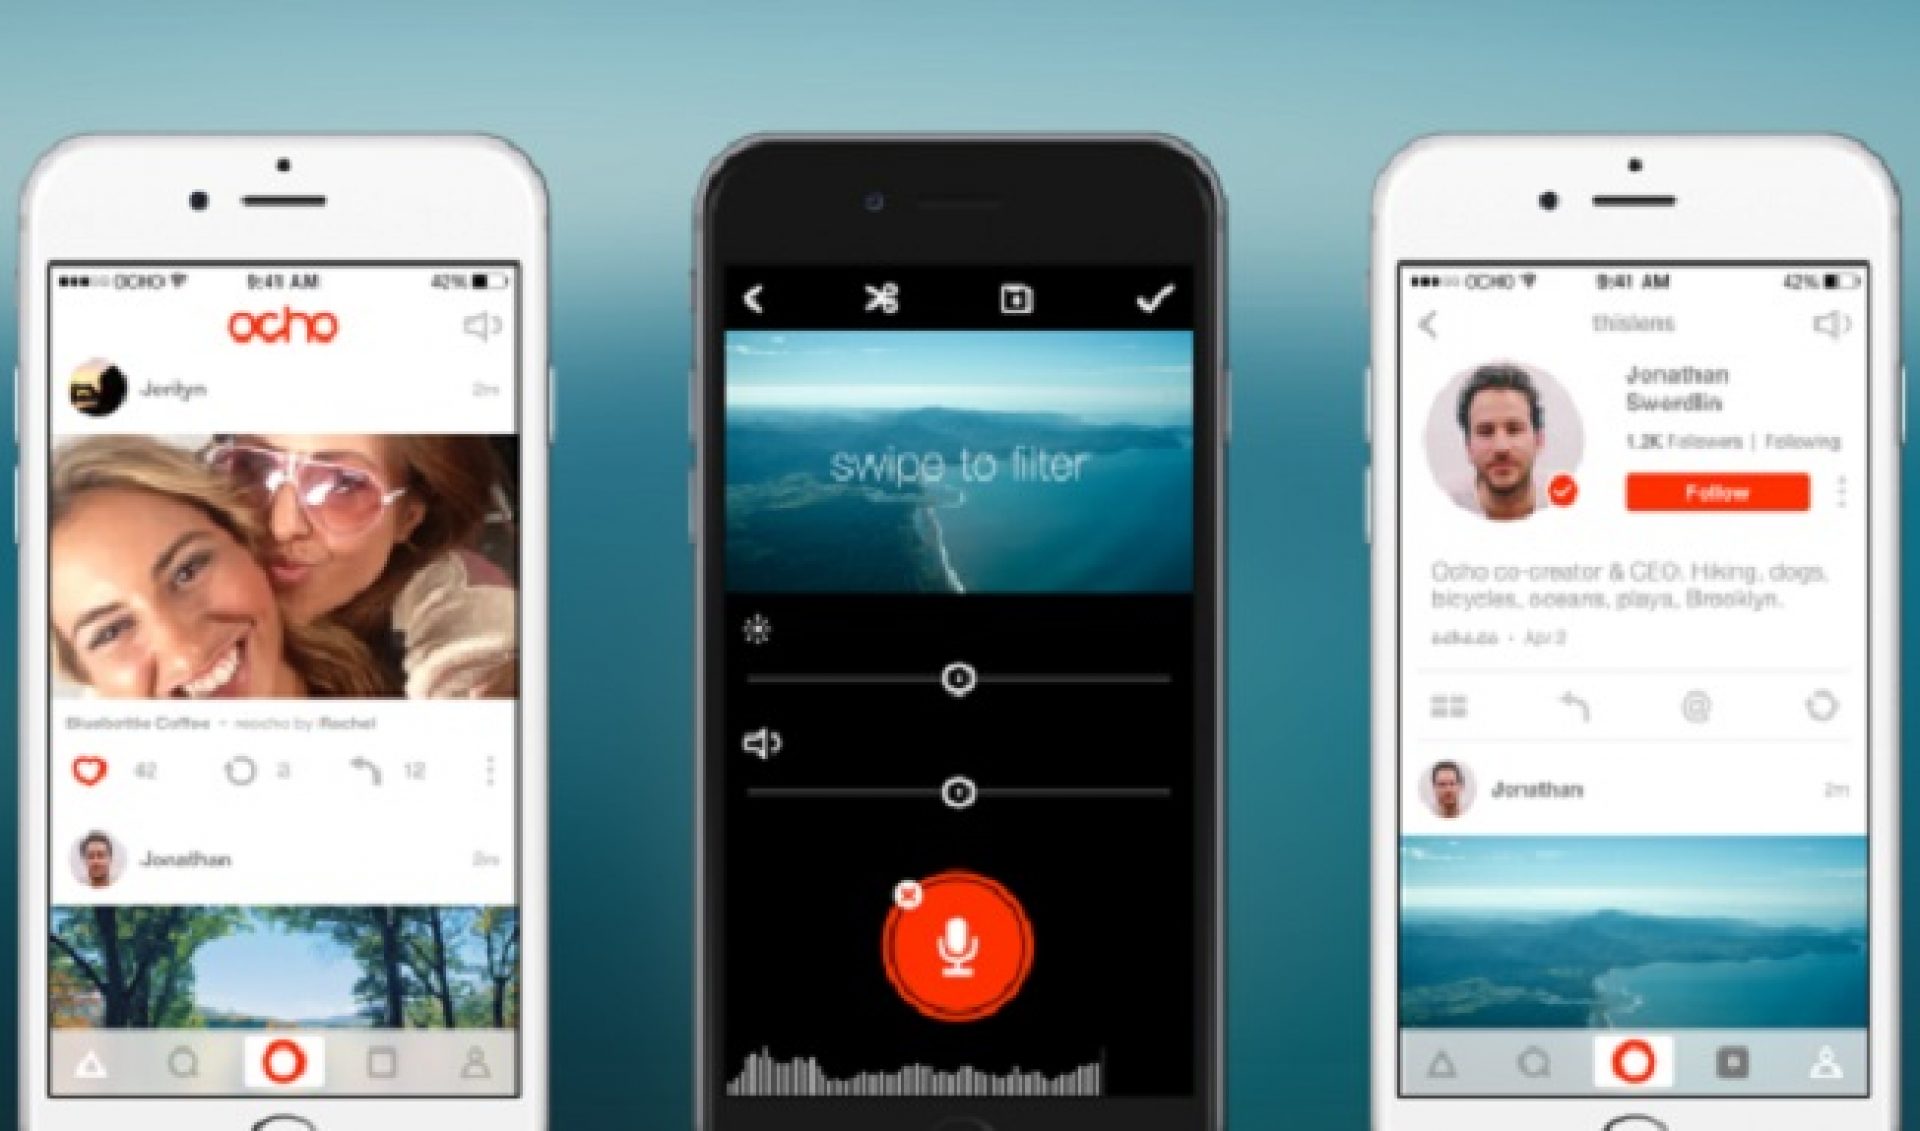 Eight-Second Video App Startup Ocho Launches With $1.65 Million In Funding